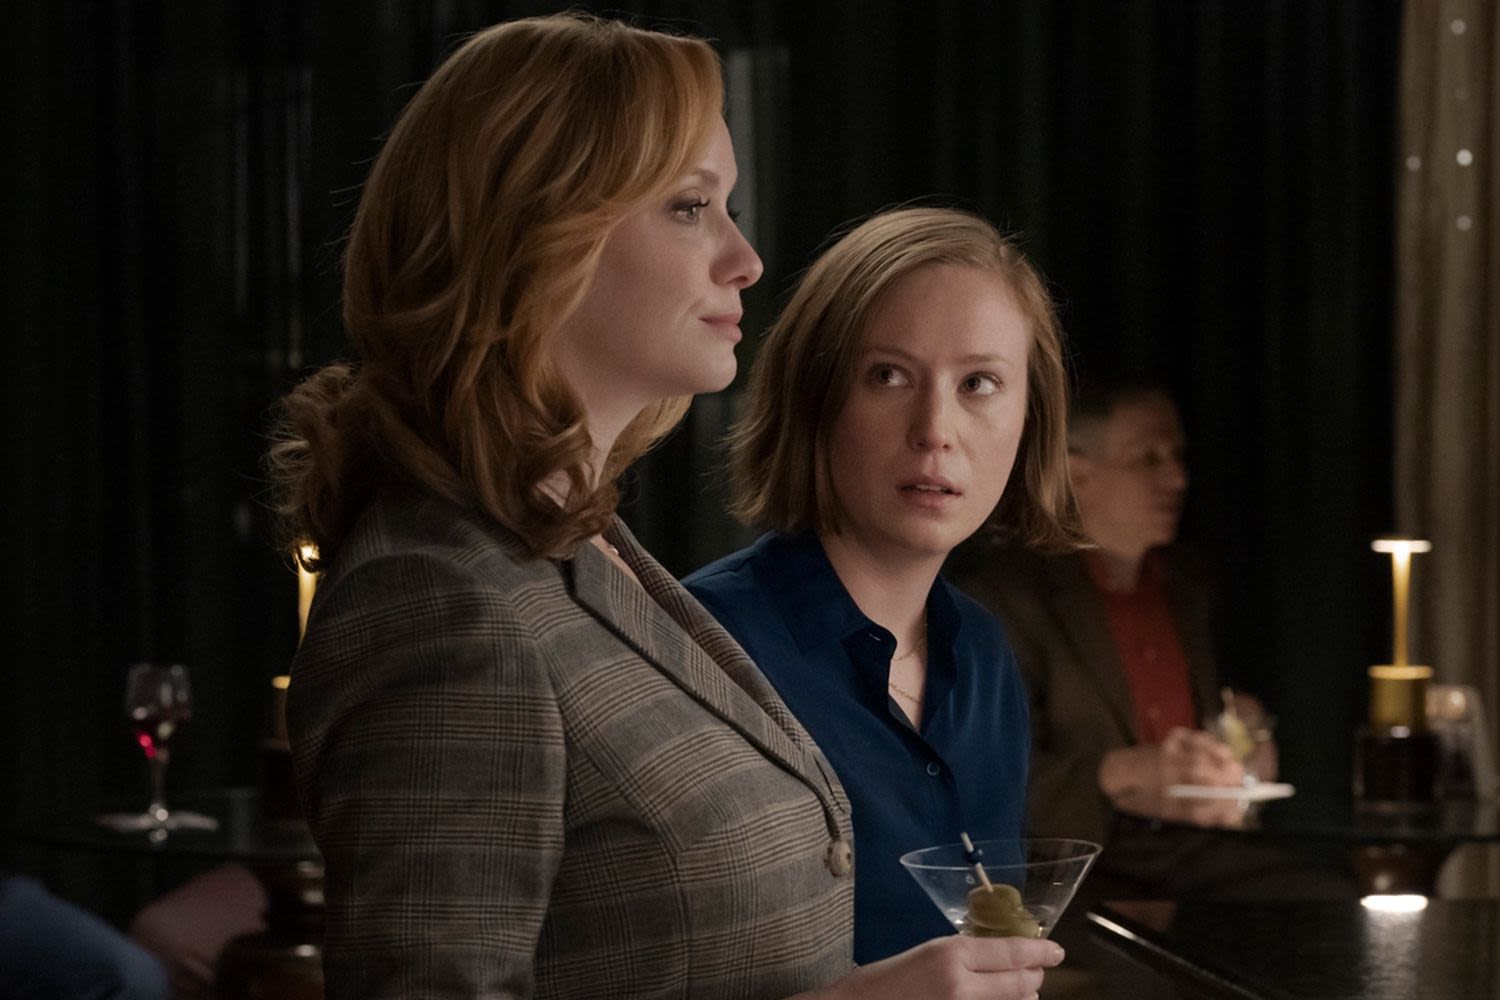 Hannah Einbinder Says Christina Hendricks Is a 'National Treasure' After Their Spicy 'Hacks' Episode Together